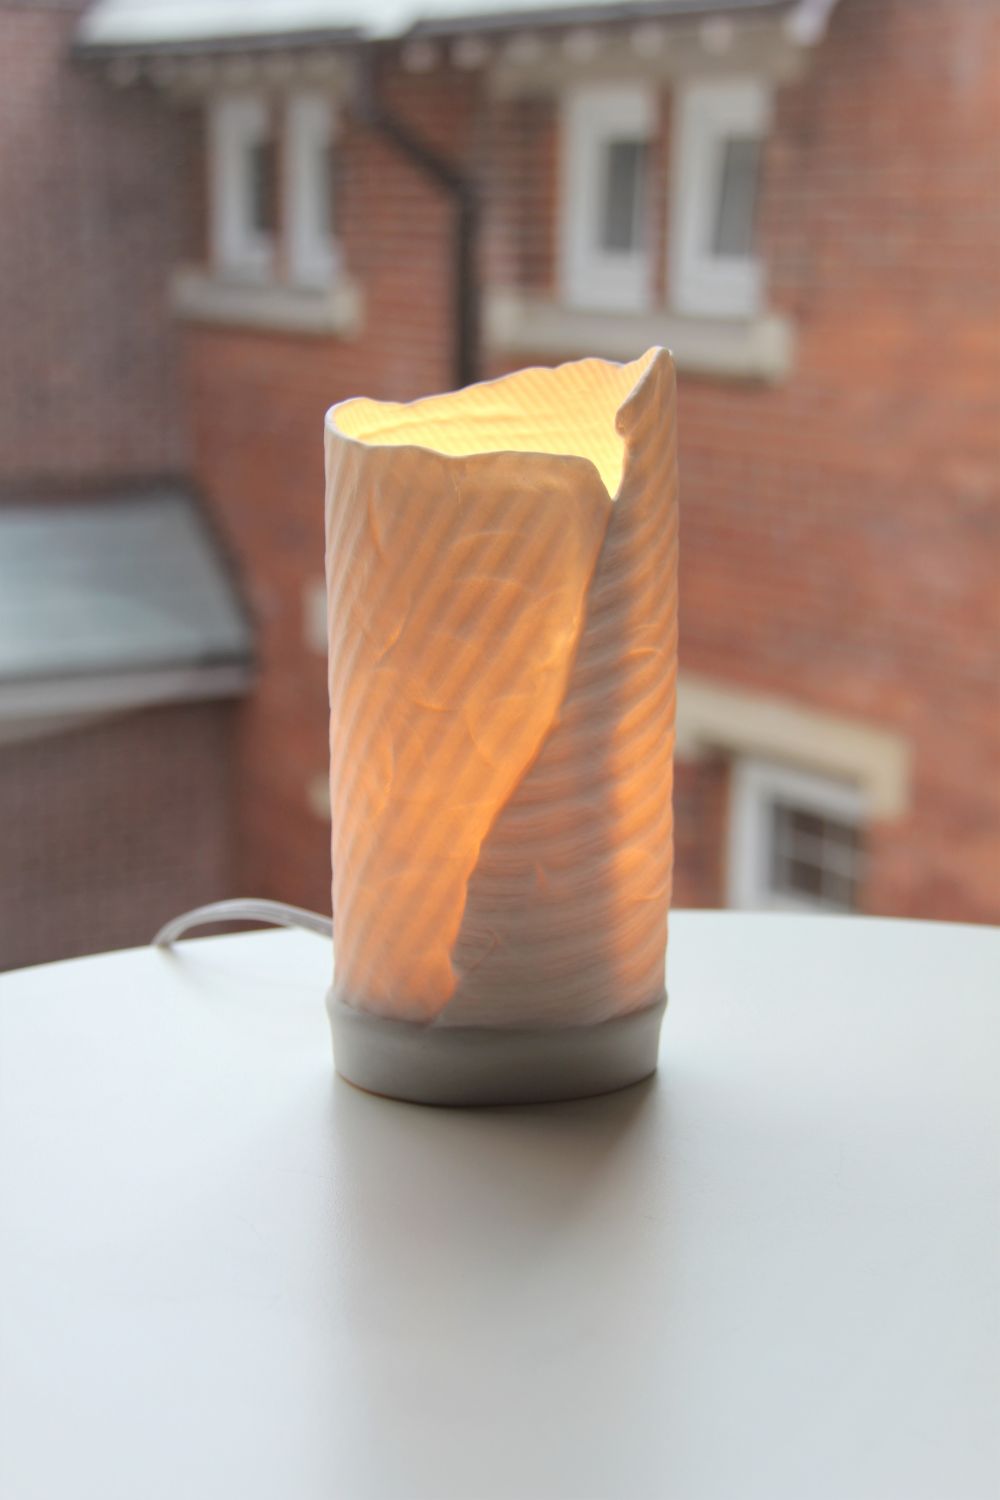 Silvana Michetti: Small Porcelain Lamp titled “Solace 4” Product Image 3 of 5